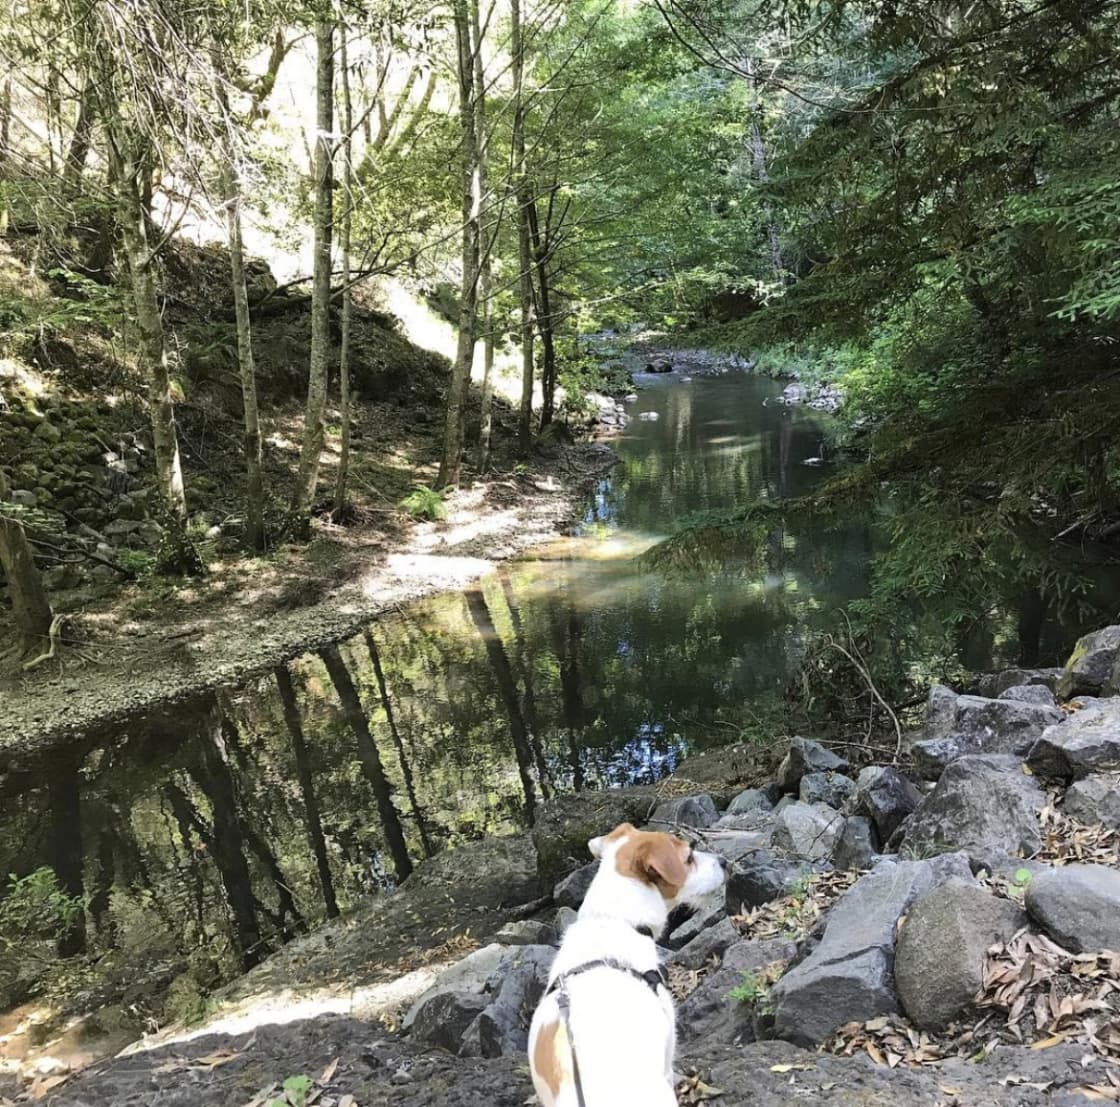 Mt Tam watershed - dog-friendly hike to Cataract Falls. Early Summer